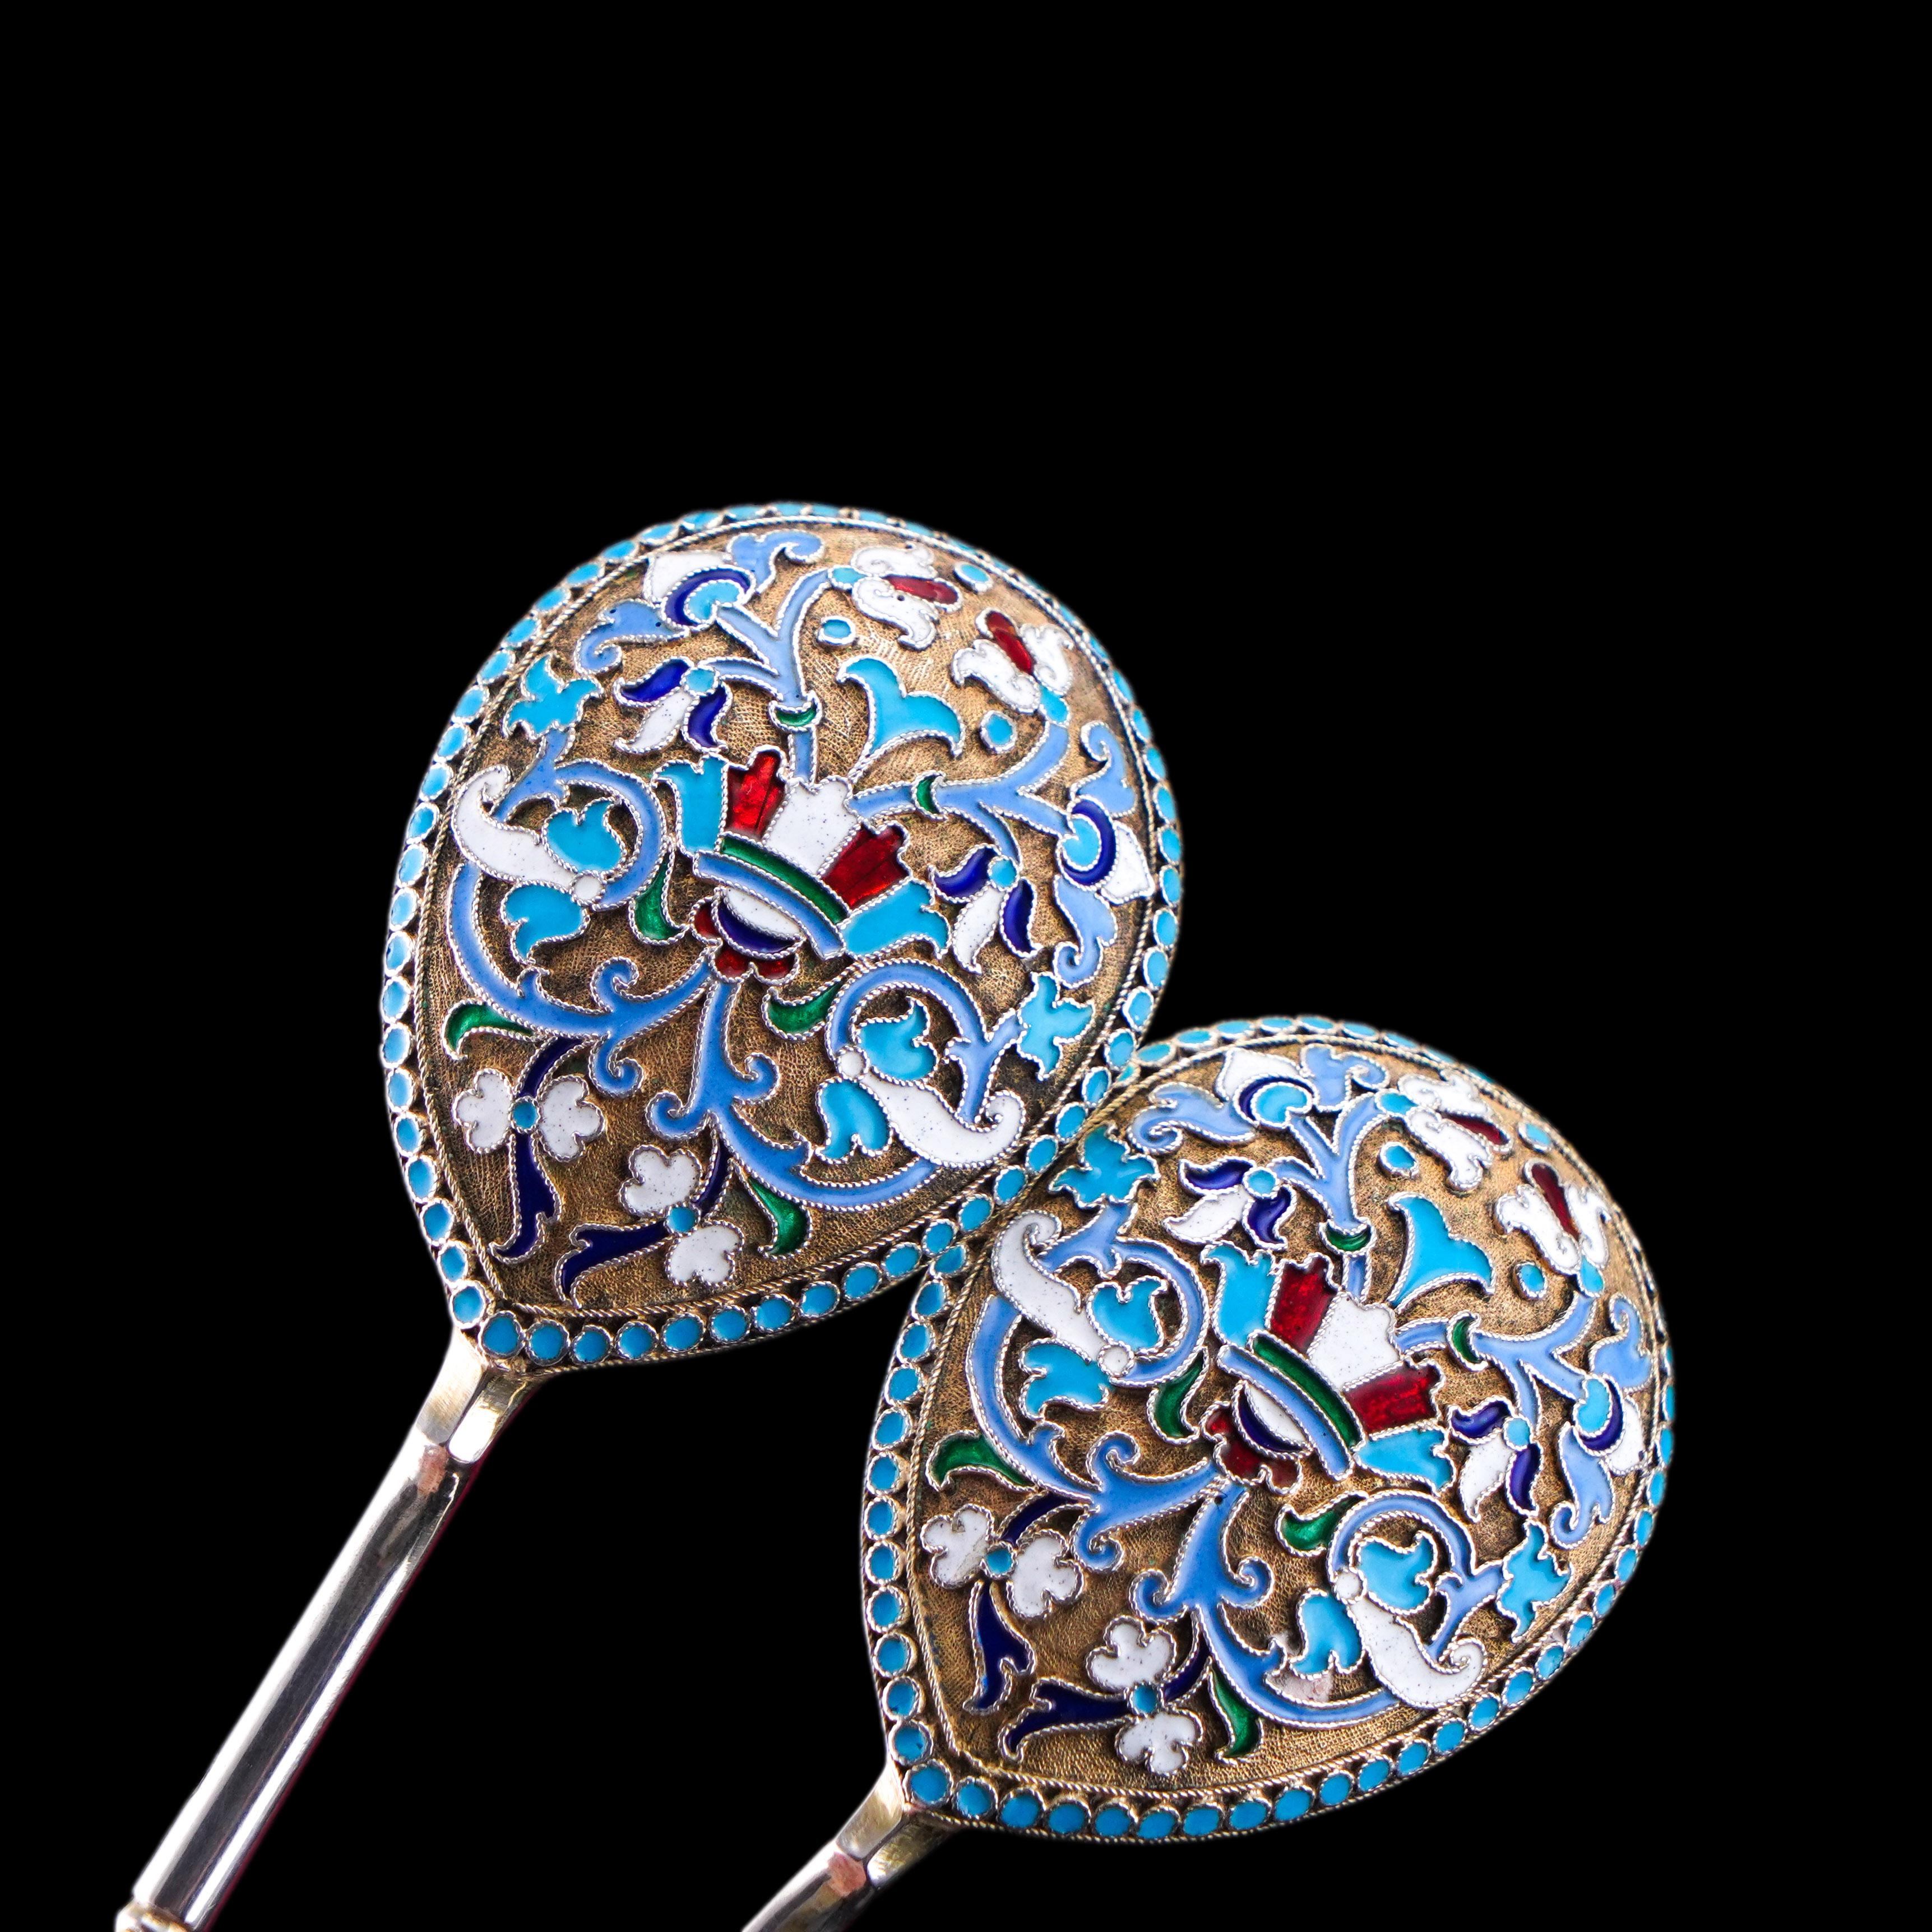 Antique Imperial Russian Solid Silver Spoons with Cloisonne Enamel c.1882 For Sale 2